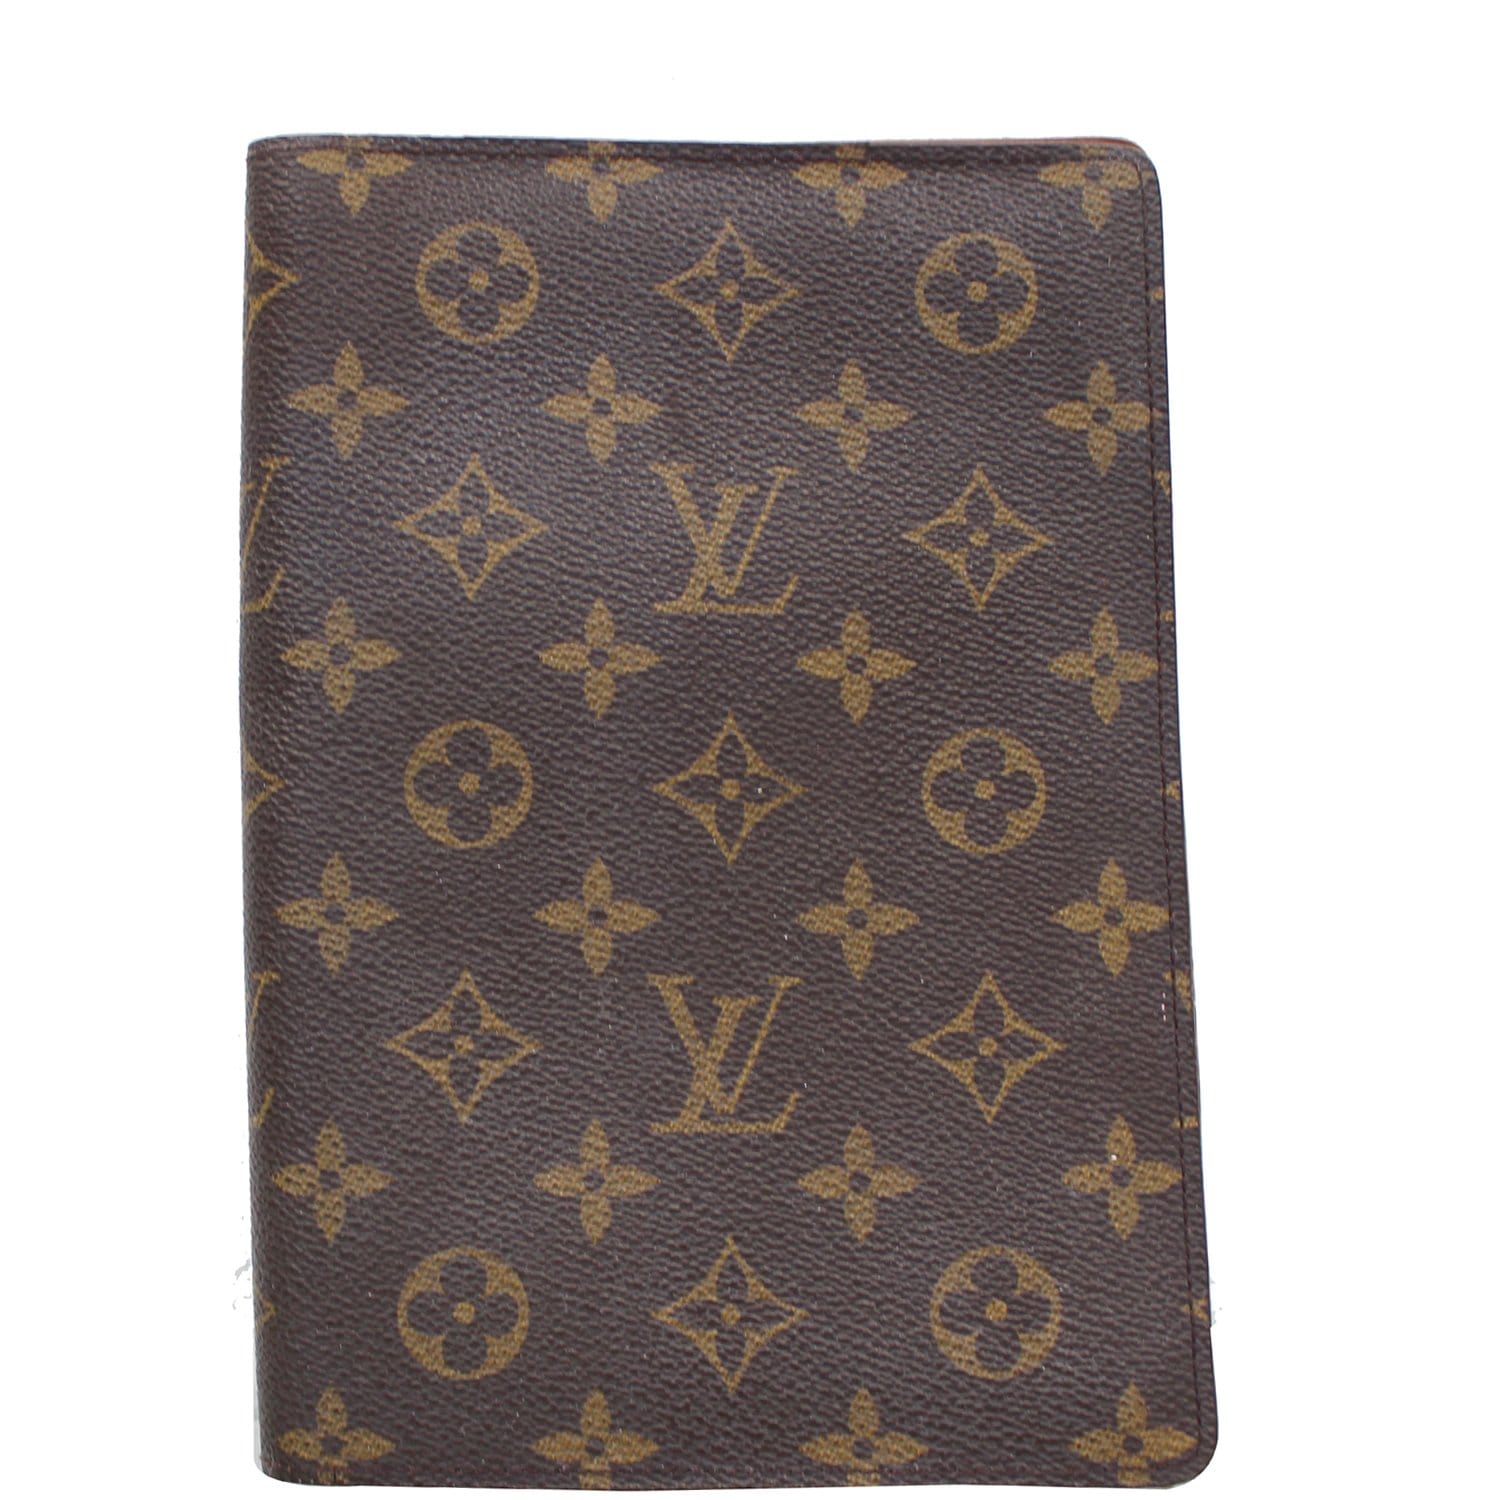 LOUIS VUITTON - NOTEBOOK OF BLUE COATED CANVAS WITH MONOGRAM - NEW CONDITION